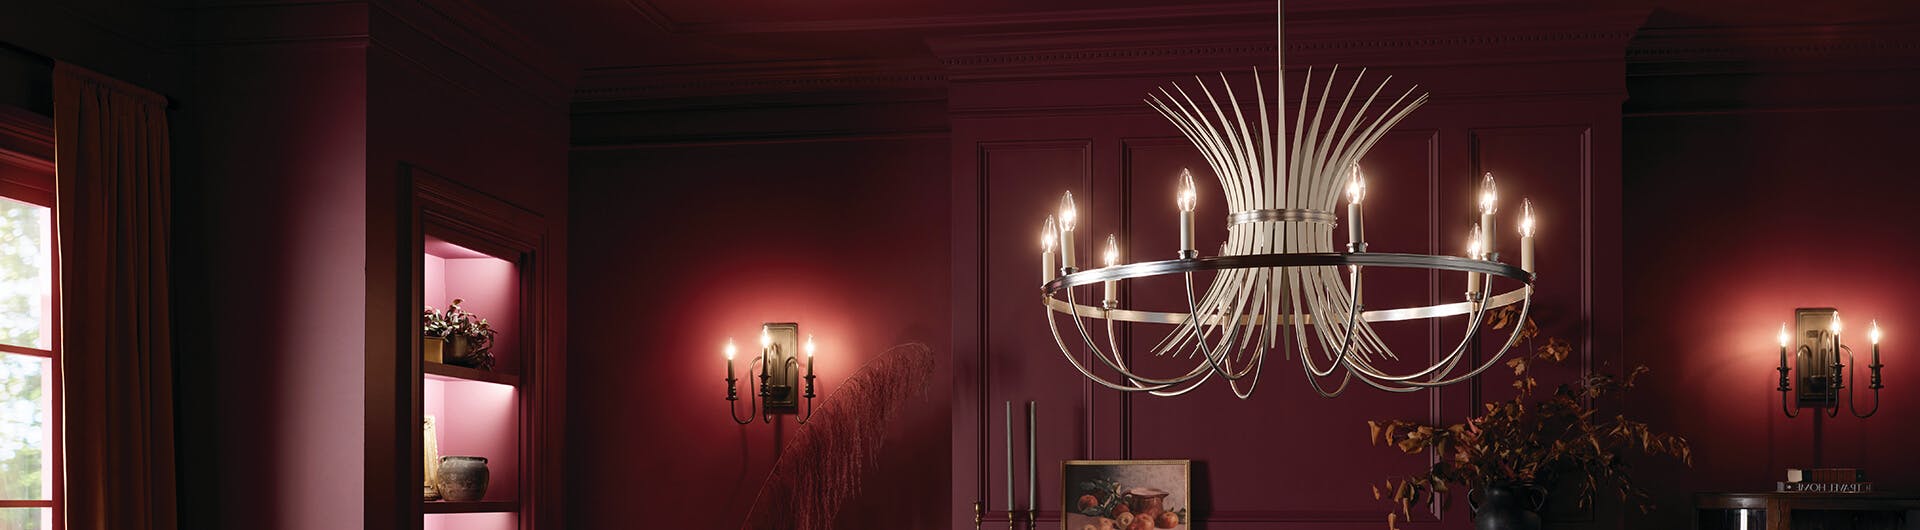 Dark red dining room lit by a brushed nickel Baile chandelier over the table with two sconces in the background